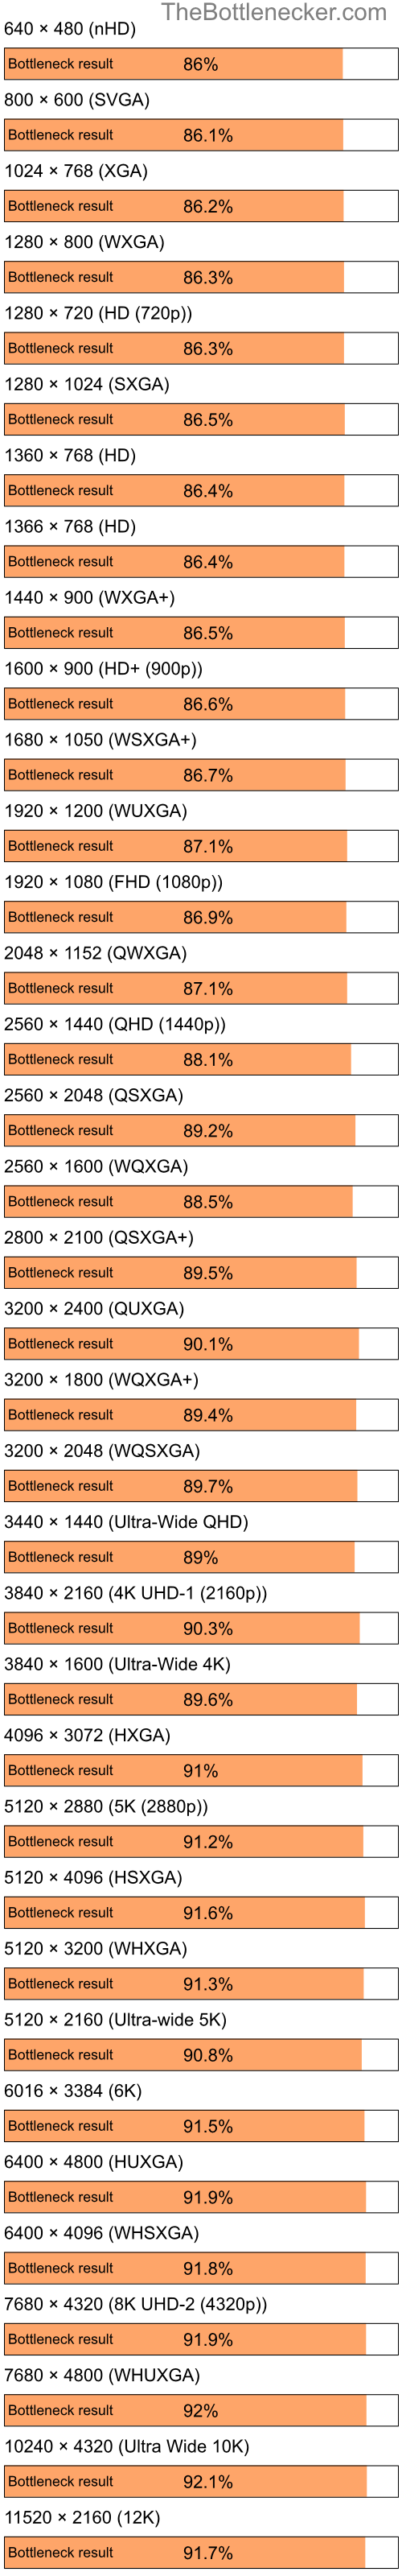 Bottleneck results by resolution for Intel Celeron M 420 and NVIDIA GeForce FX Go 5600 in Graphic Card Intense Tasks